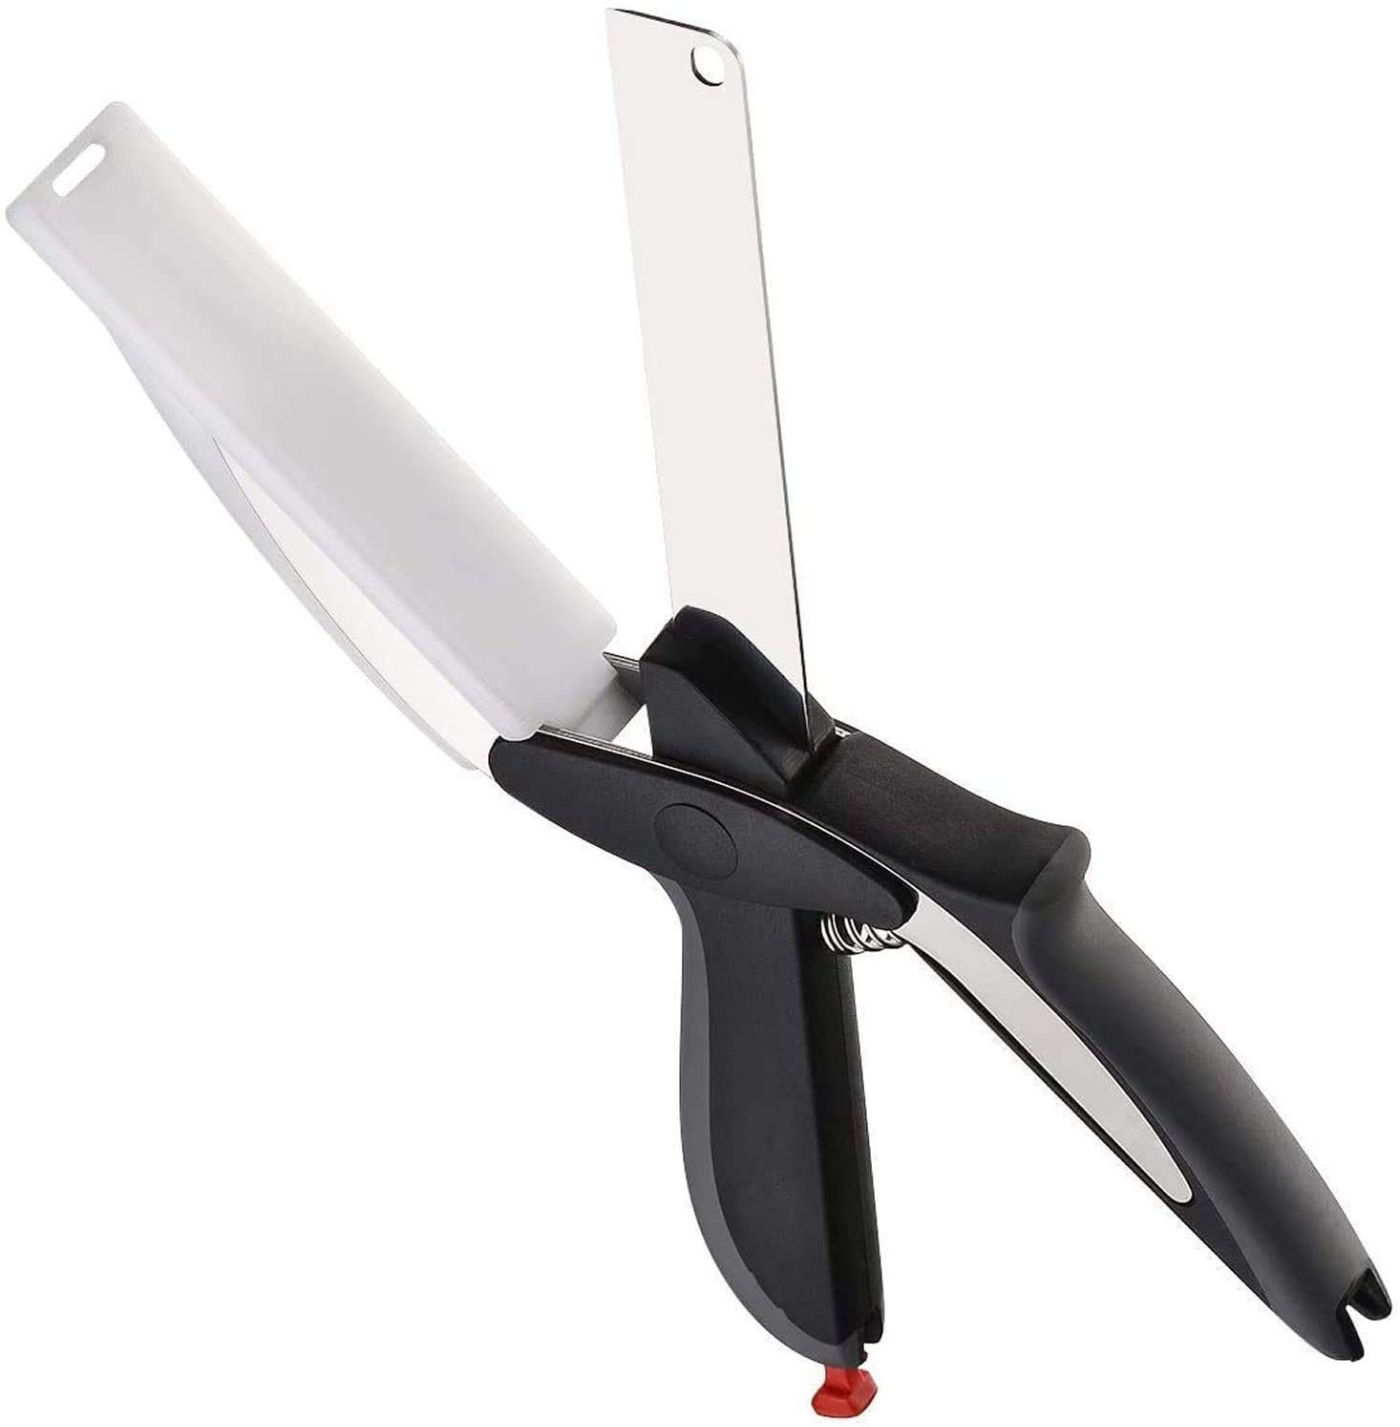 Kitchen Food Scissors, Food Cutter Chopper Clever Stainless Steel Knife with Cutting Board Built-in-Use for Quick and Easy Cutting in Your Kitchen as Food shears,Vegetable Slicer,Fruit Cutter